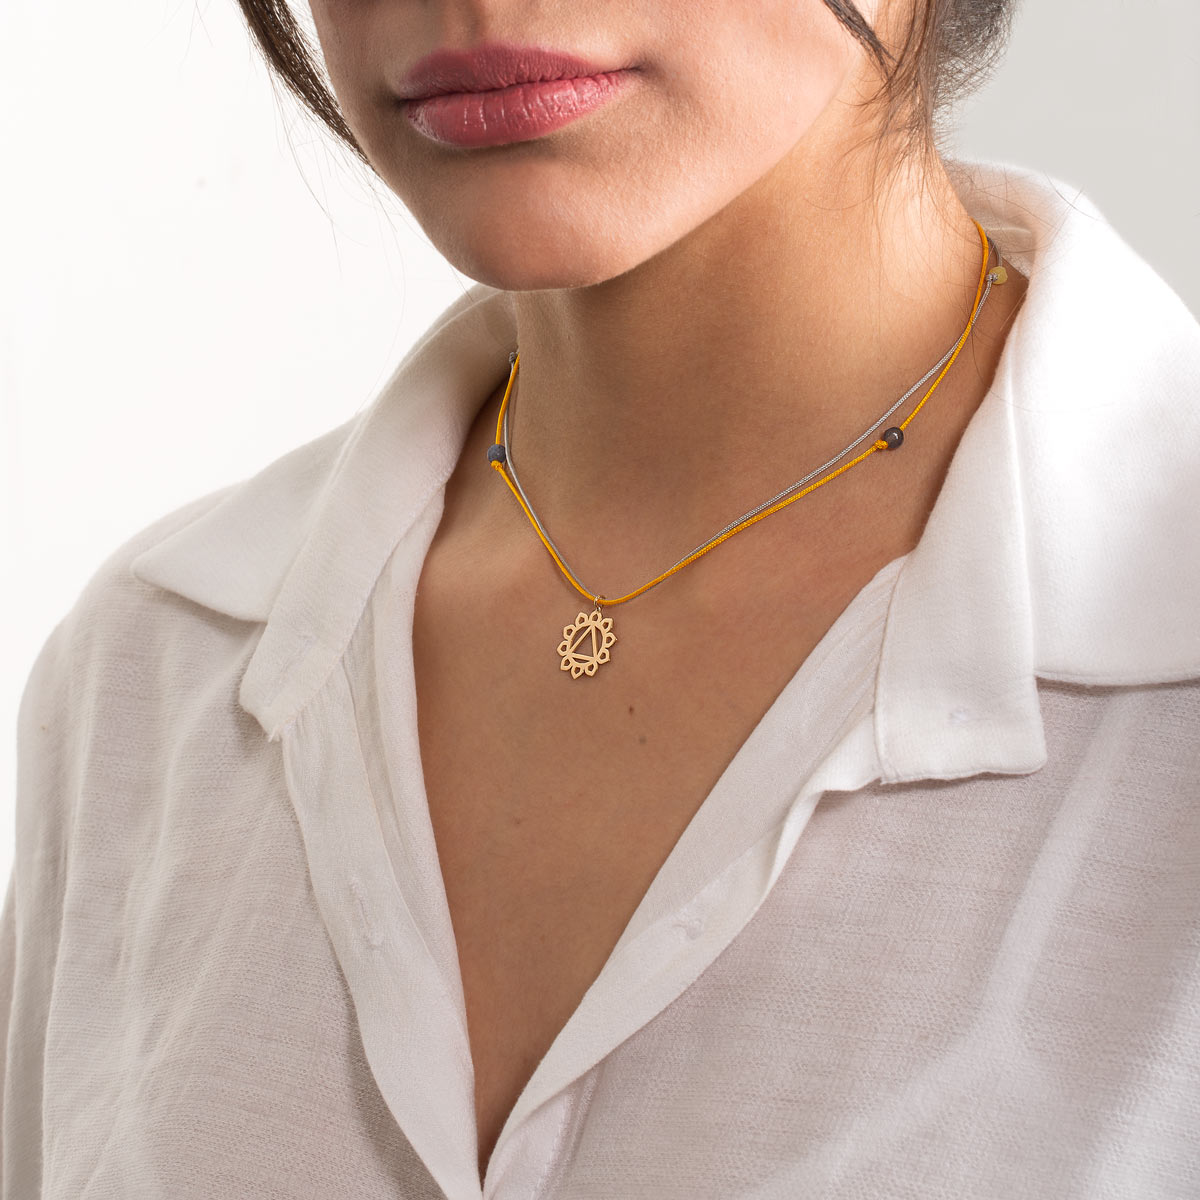 Sun chakra gold necklace in